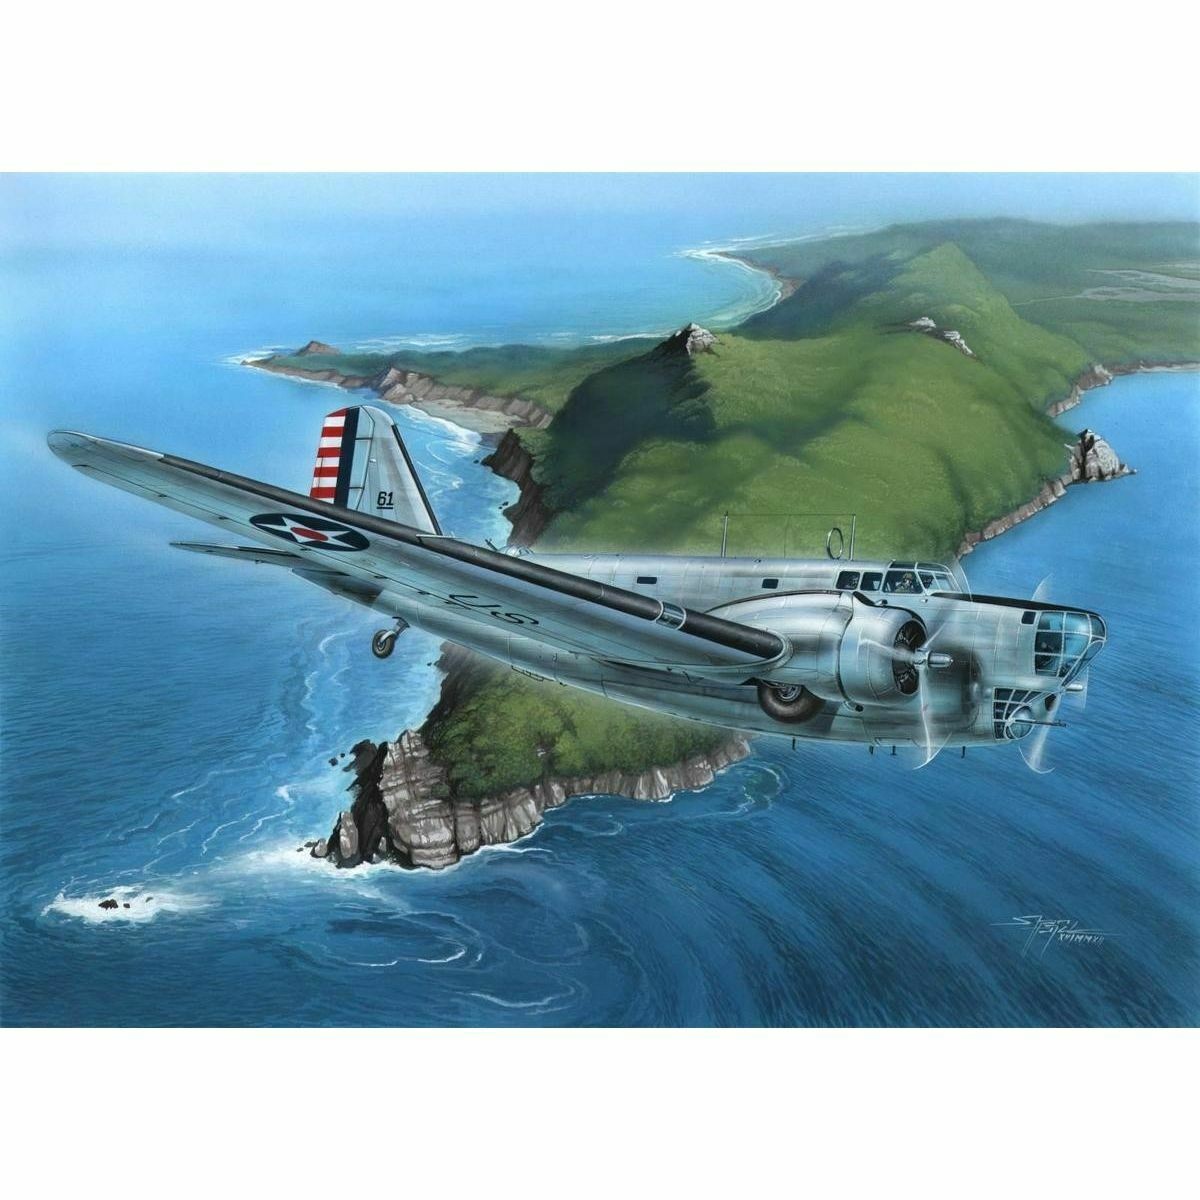 Special Hobby 72228 B-18A Bolo "At War" 1:72